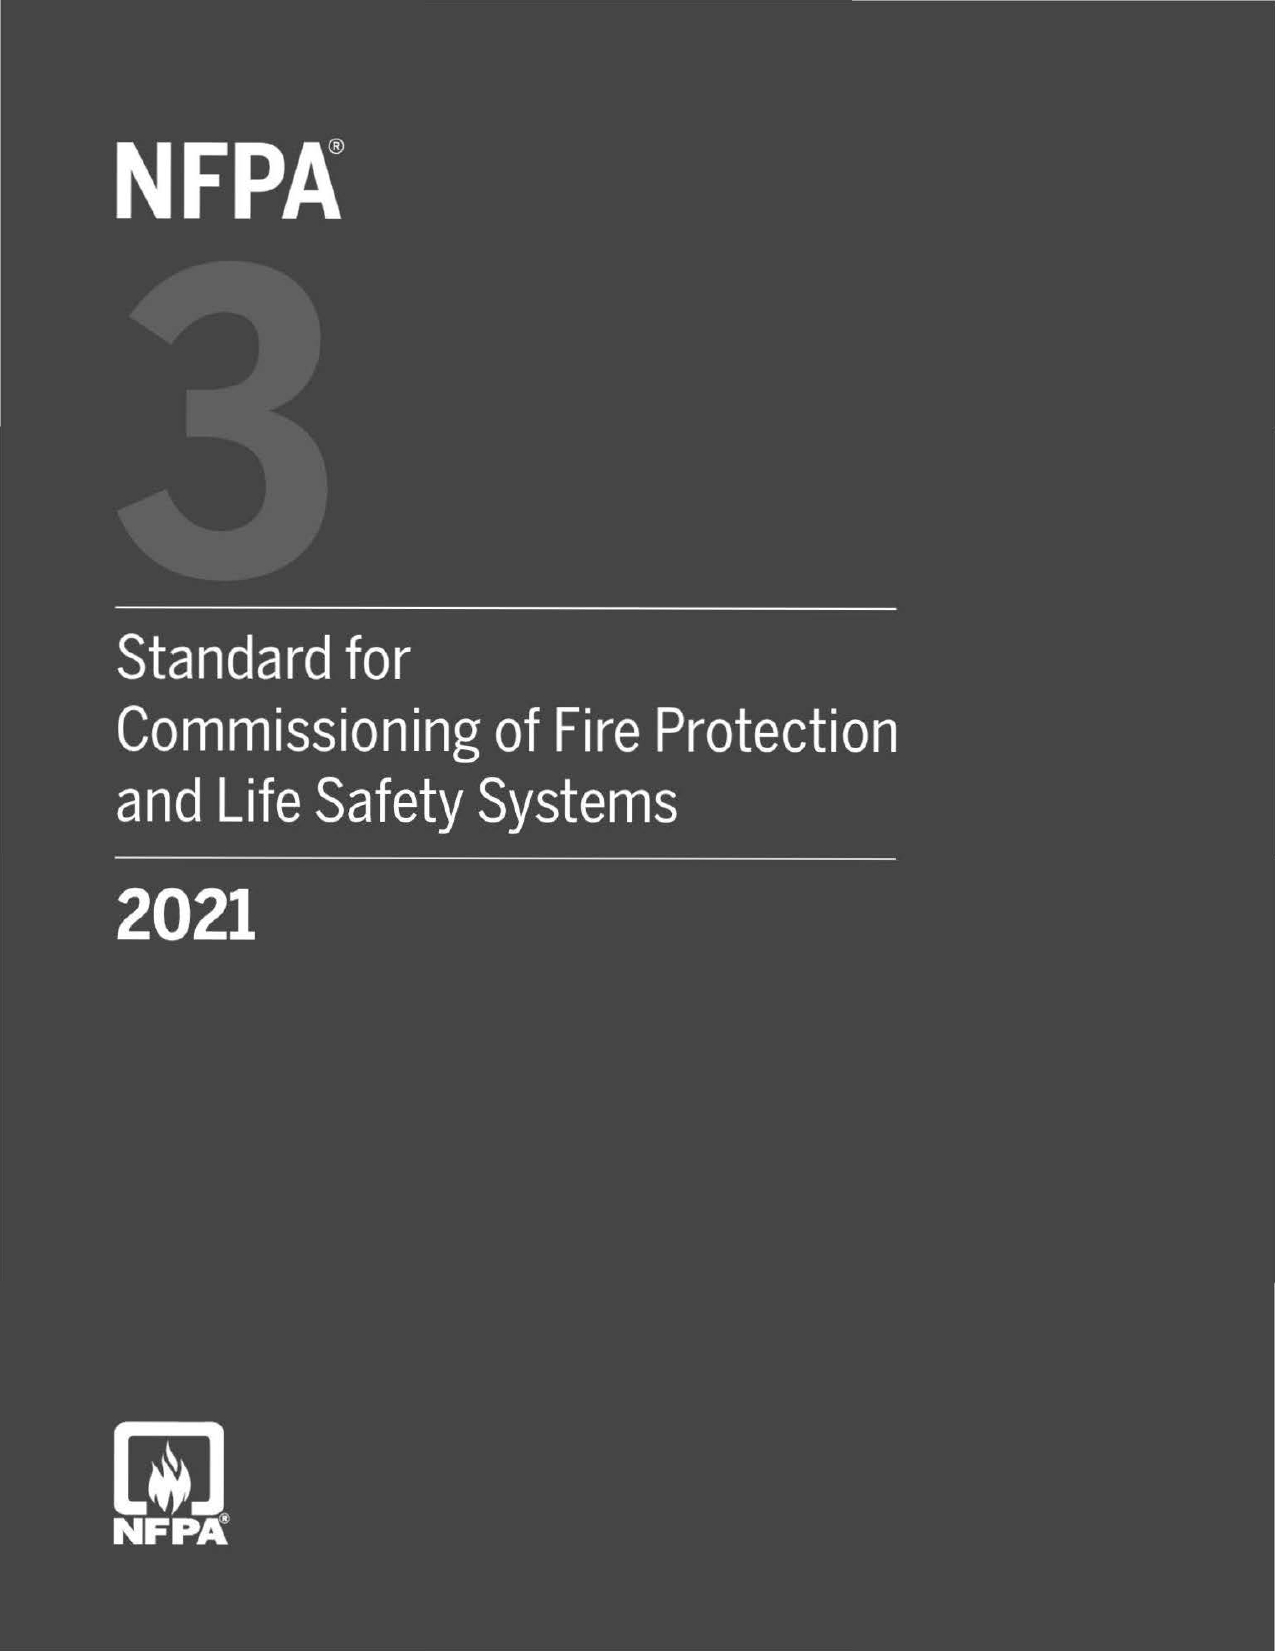 NFPA 3 - Standard for Comissioning of Fire Protection and Life Safety Systems-2021